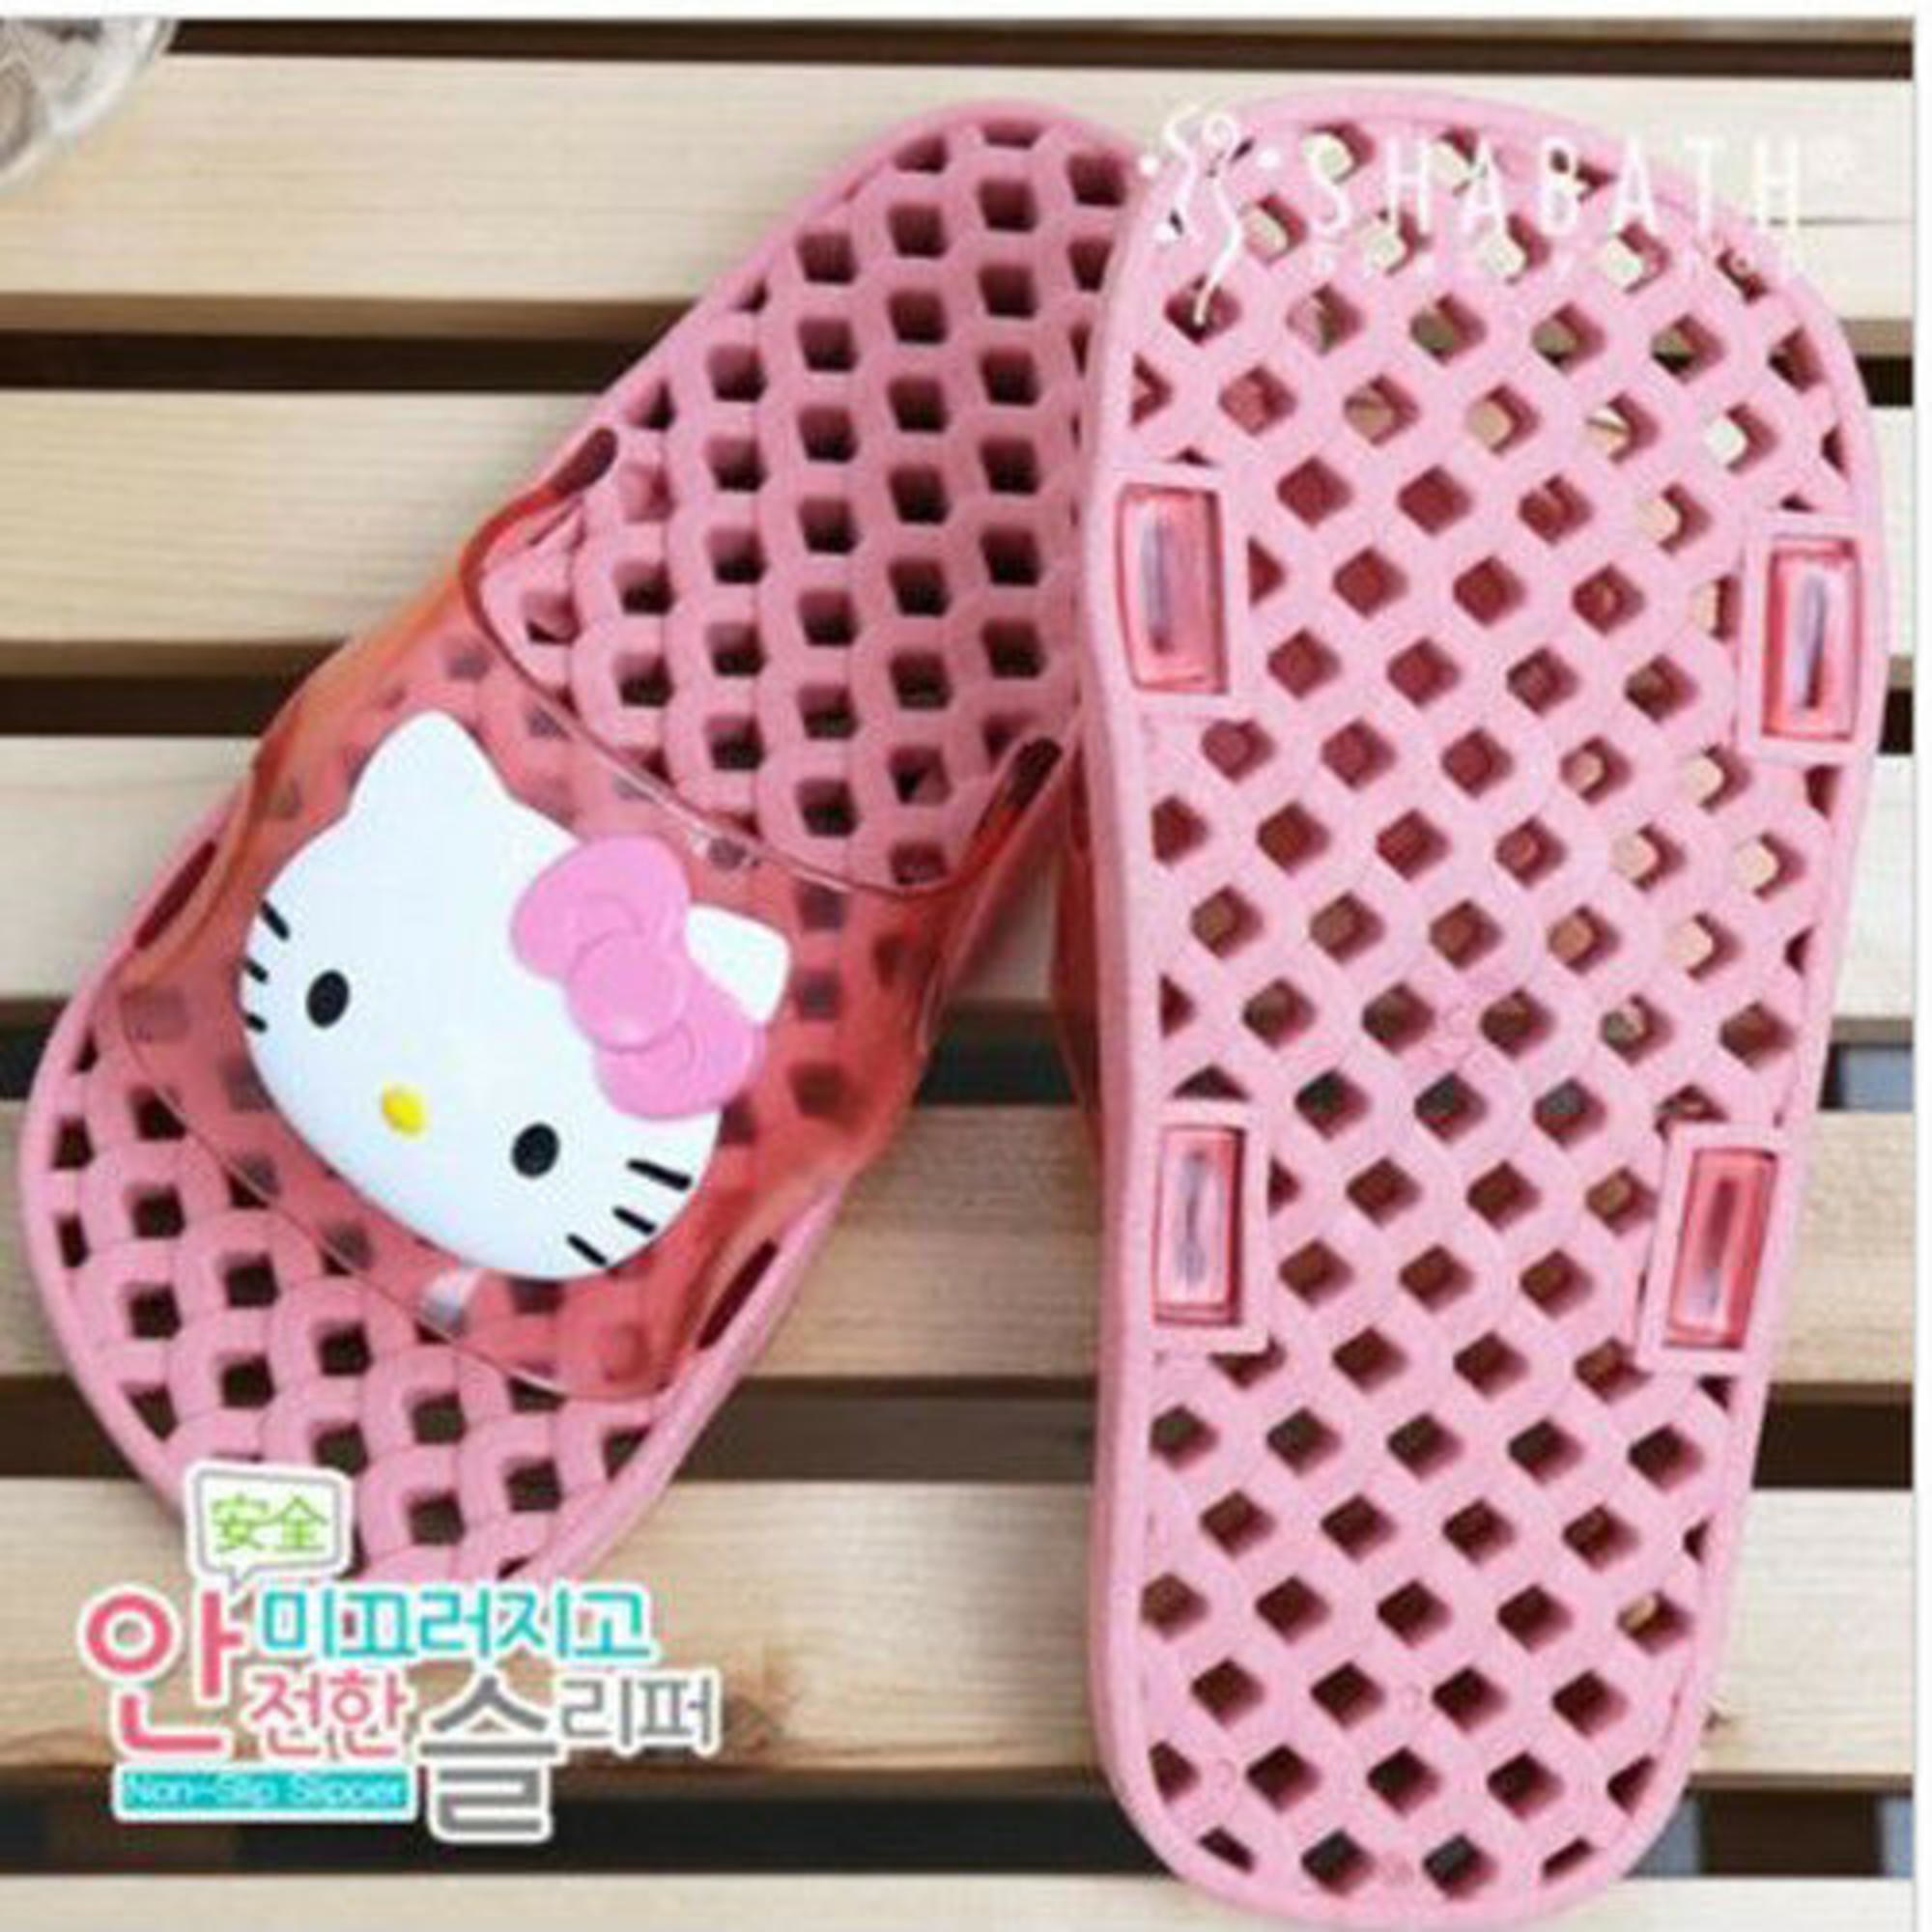 9 House Slippers That Every Asian 